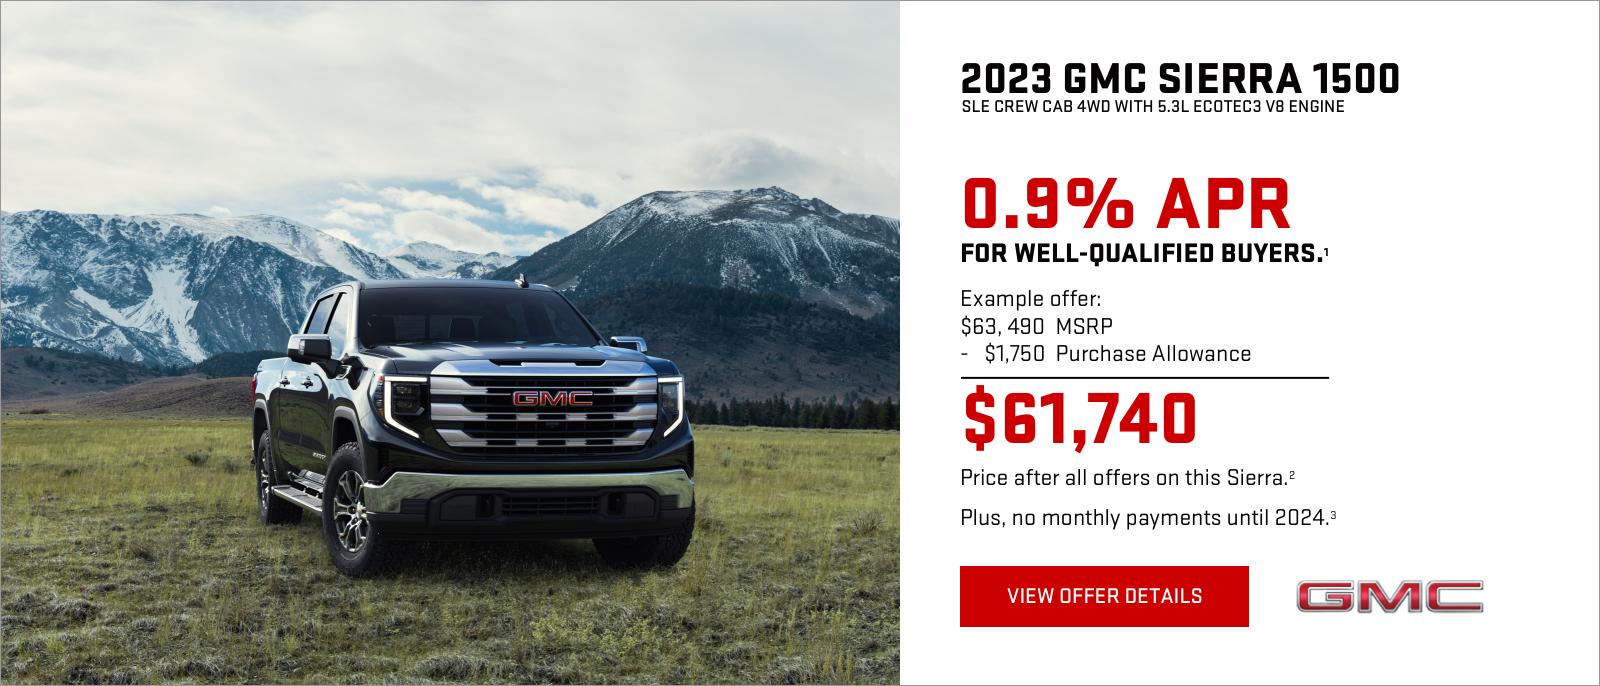 0.9% APR for well-qualified buyers.1

Example offer: 
$63,490 MSRP
$1,750 Purchase Allowance
$61,740 Price after all offers on this Sierra.2

PLUS, NO MONTHLY PAYMENTS UNTIL 2024. 3